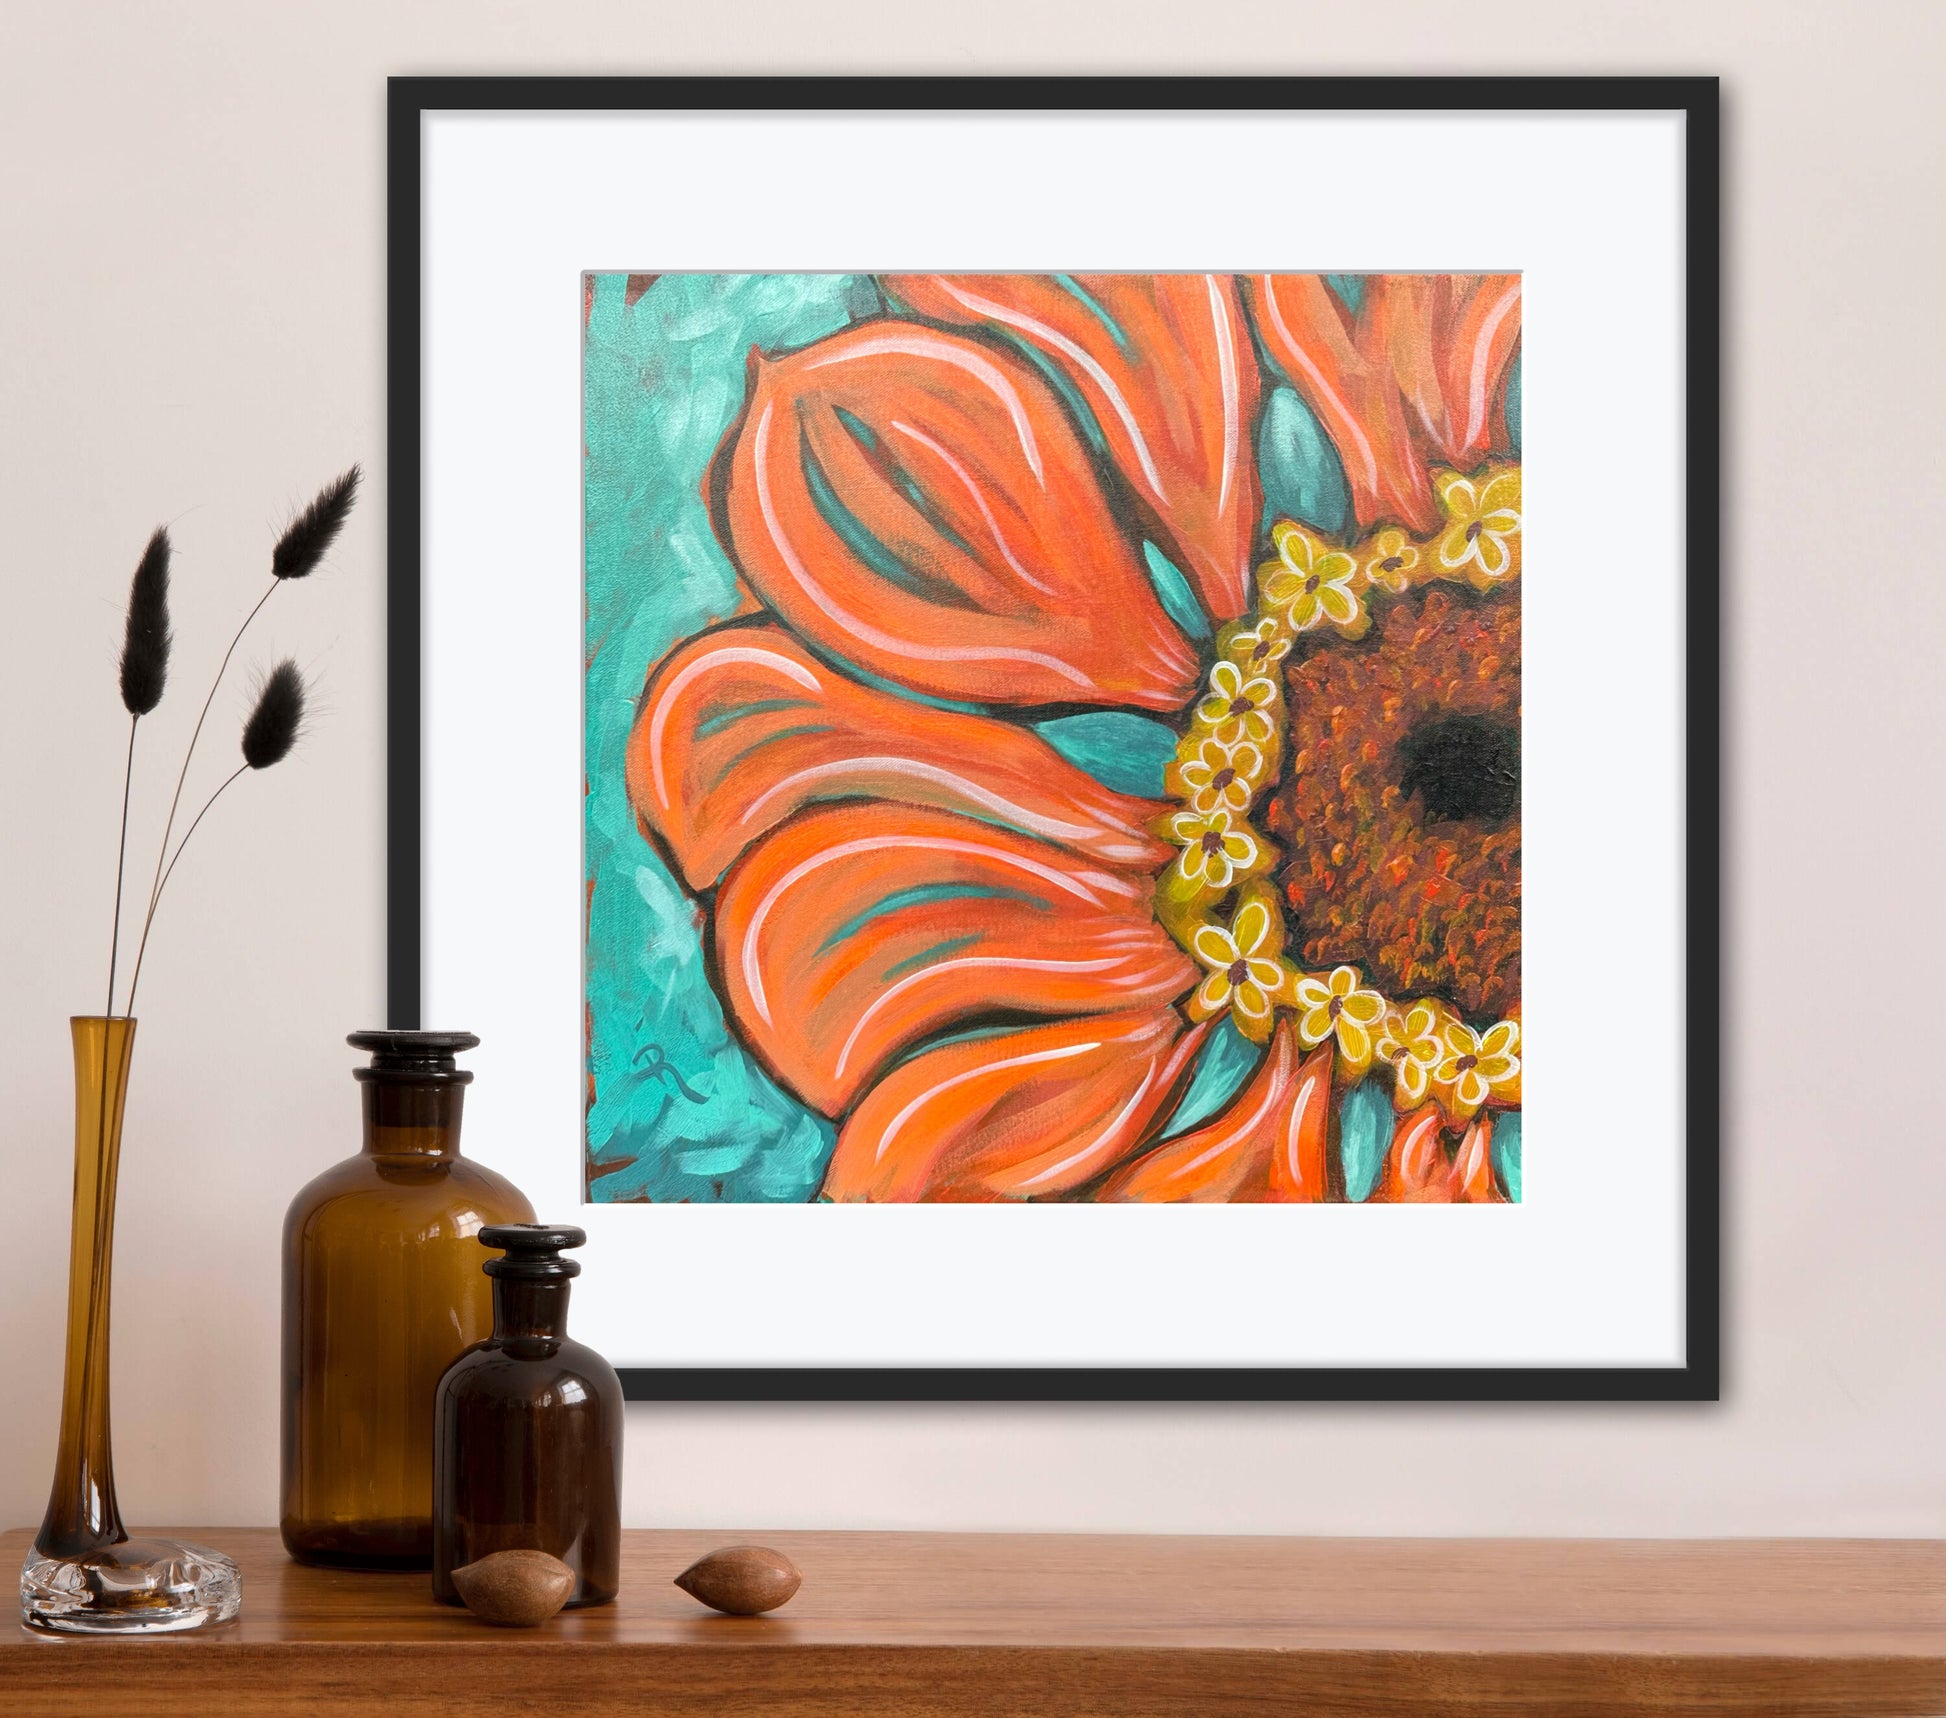 Heirloom Zinnias 8x10 canvas in a painted frame